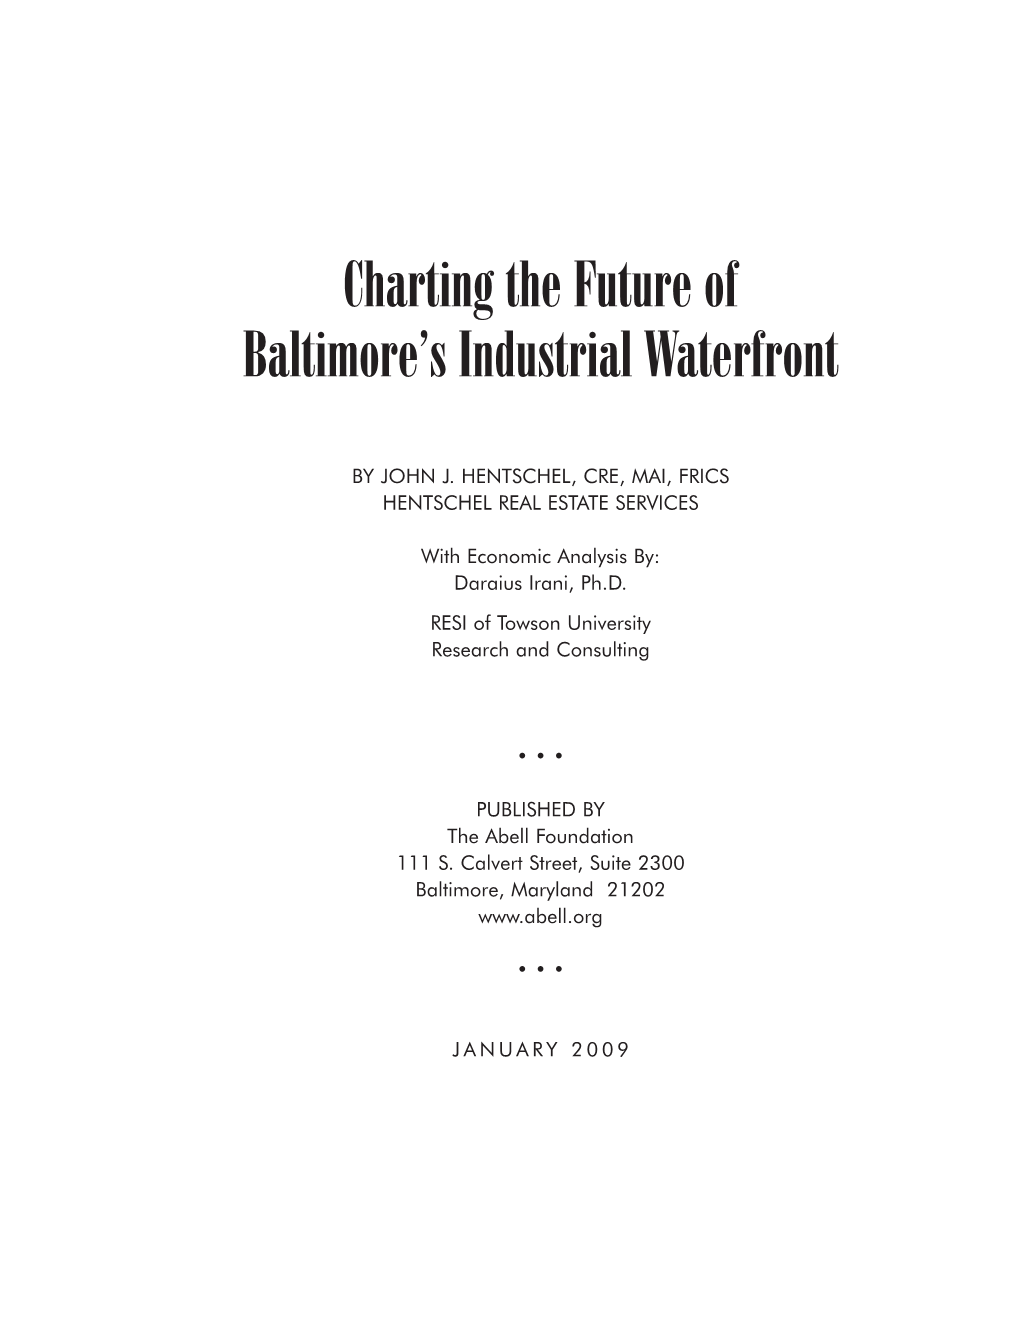 Charting the Future of Baltimore's Industrial Waterfront